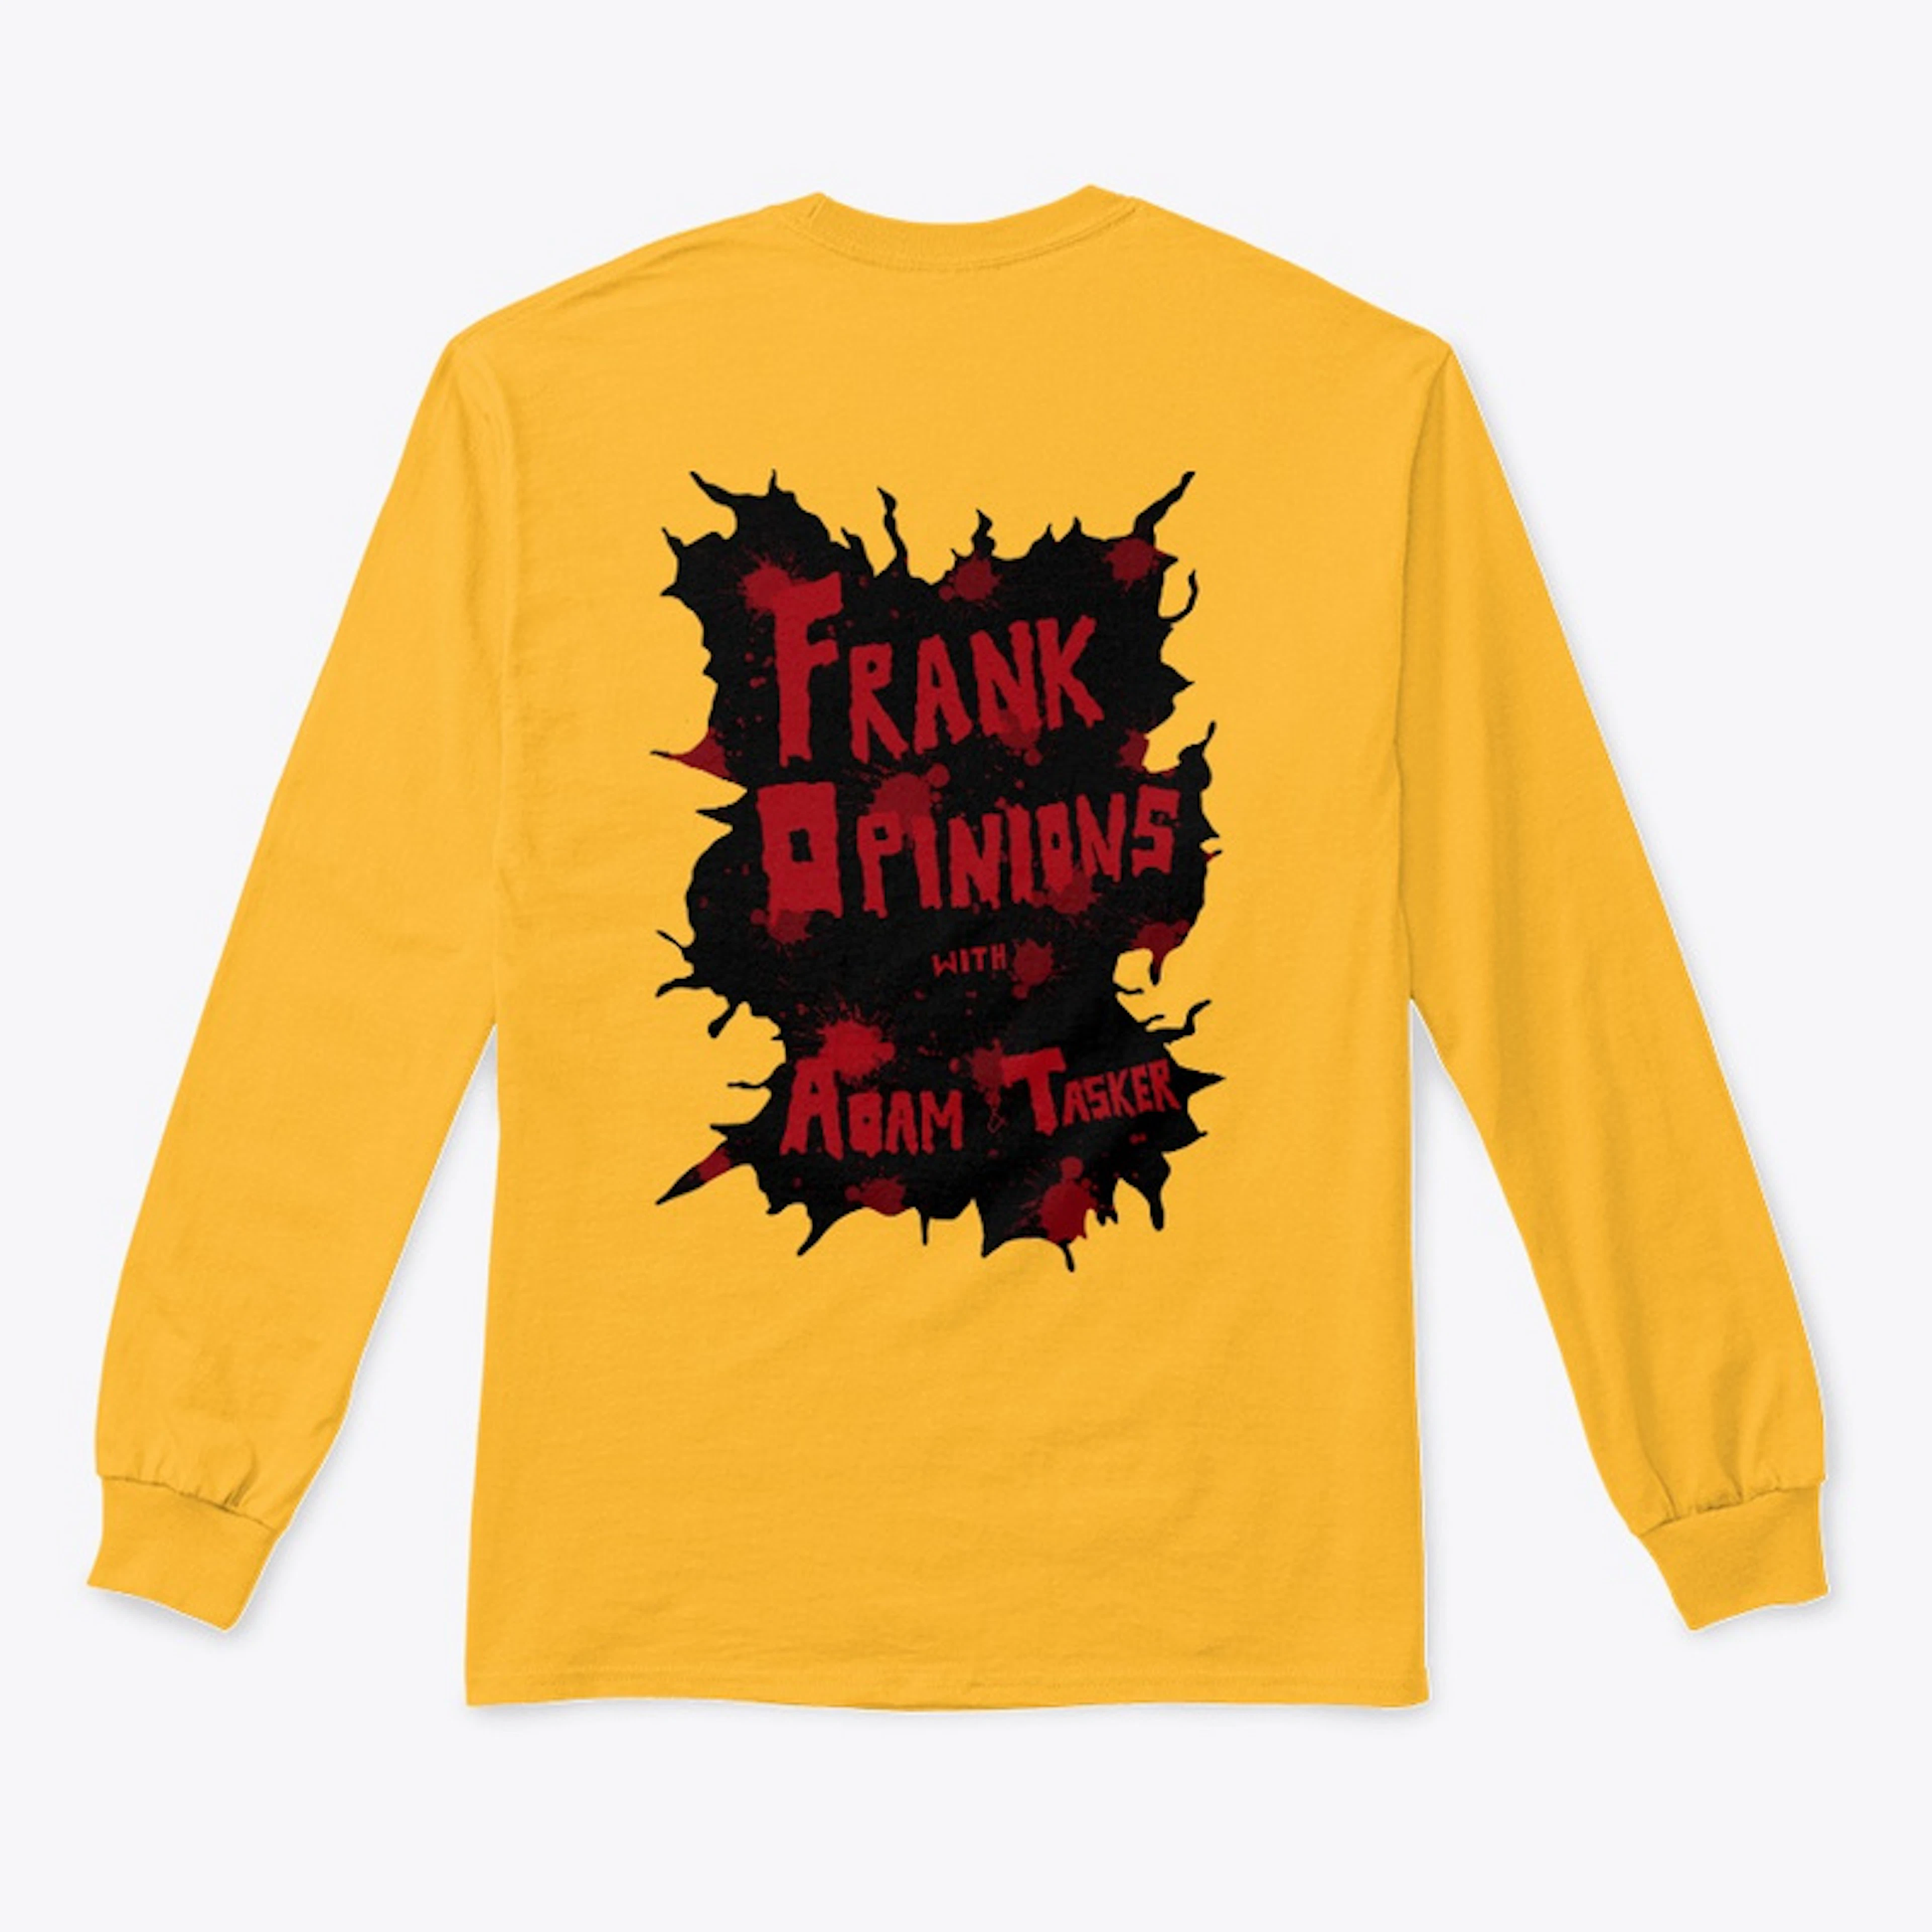 Frank Opinions (Bloody)